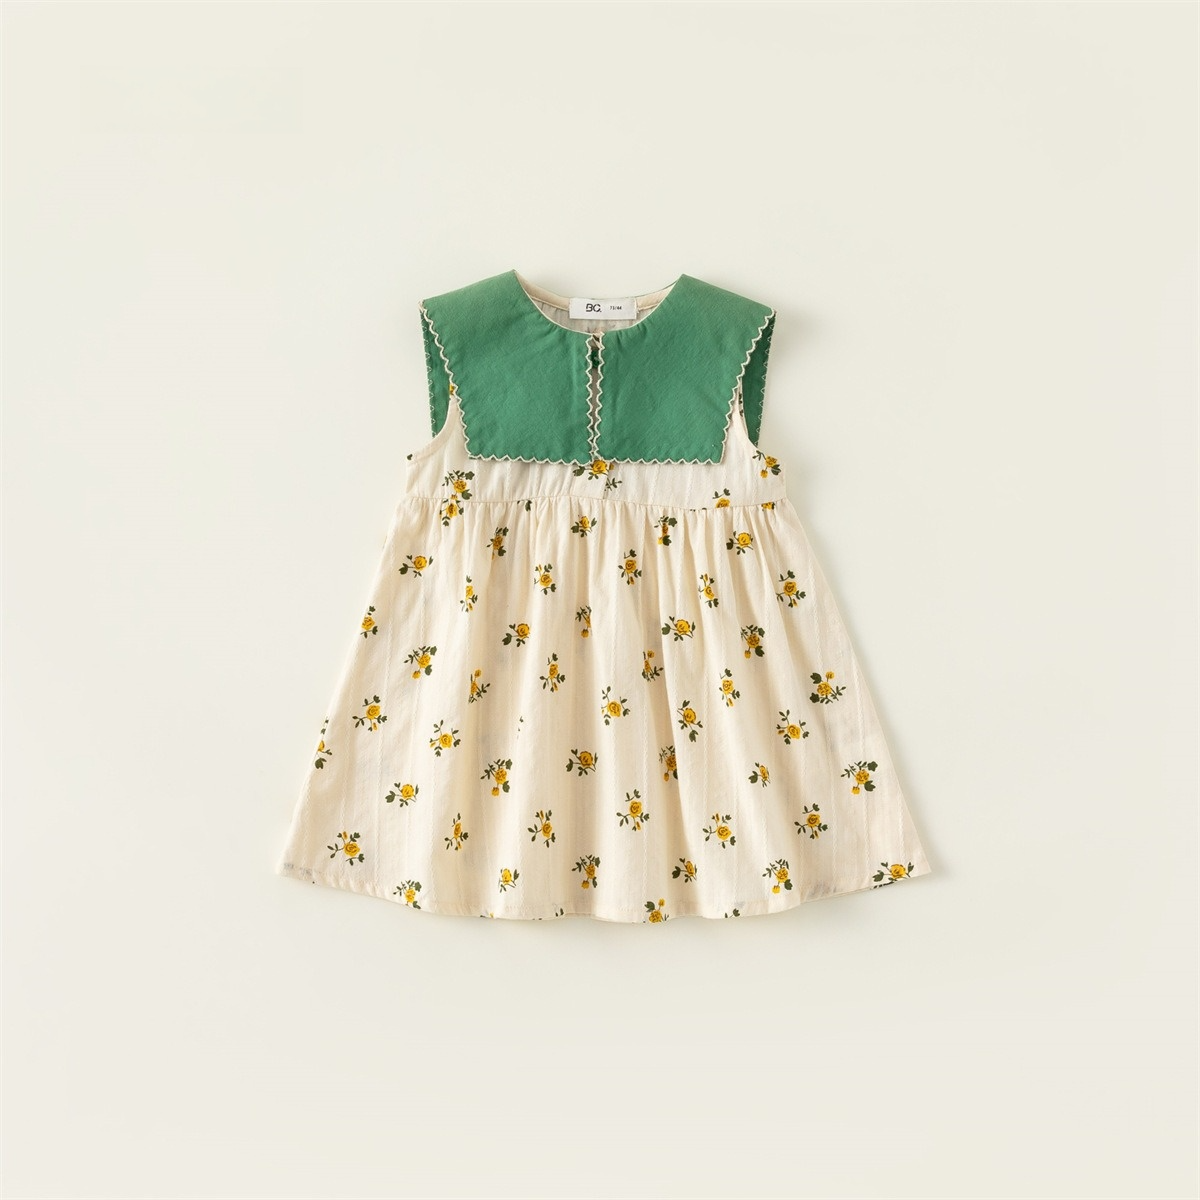 Fun Prints for Imaginative Minds kids clothing girls clothing Exquisite Detailing in Every Stitch